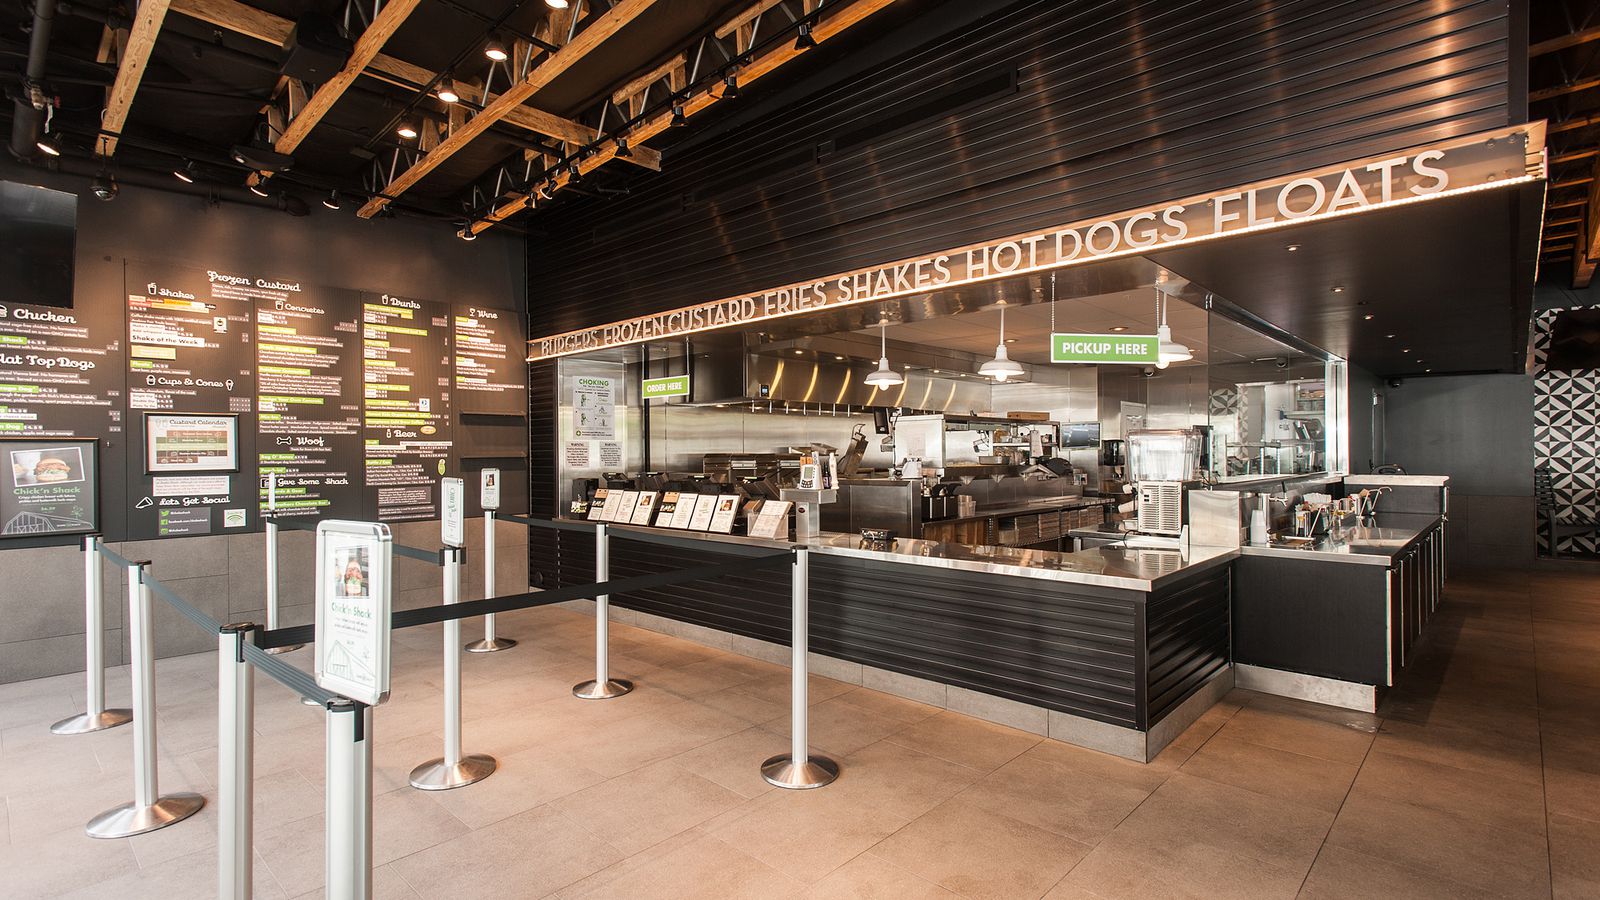 Shake Shack interior store featuring menu and grill in the background